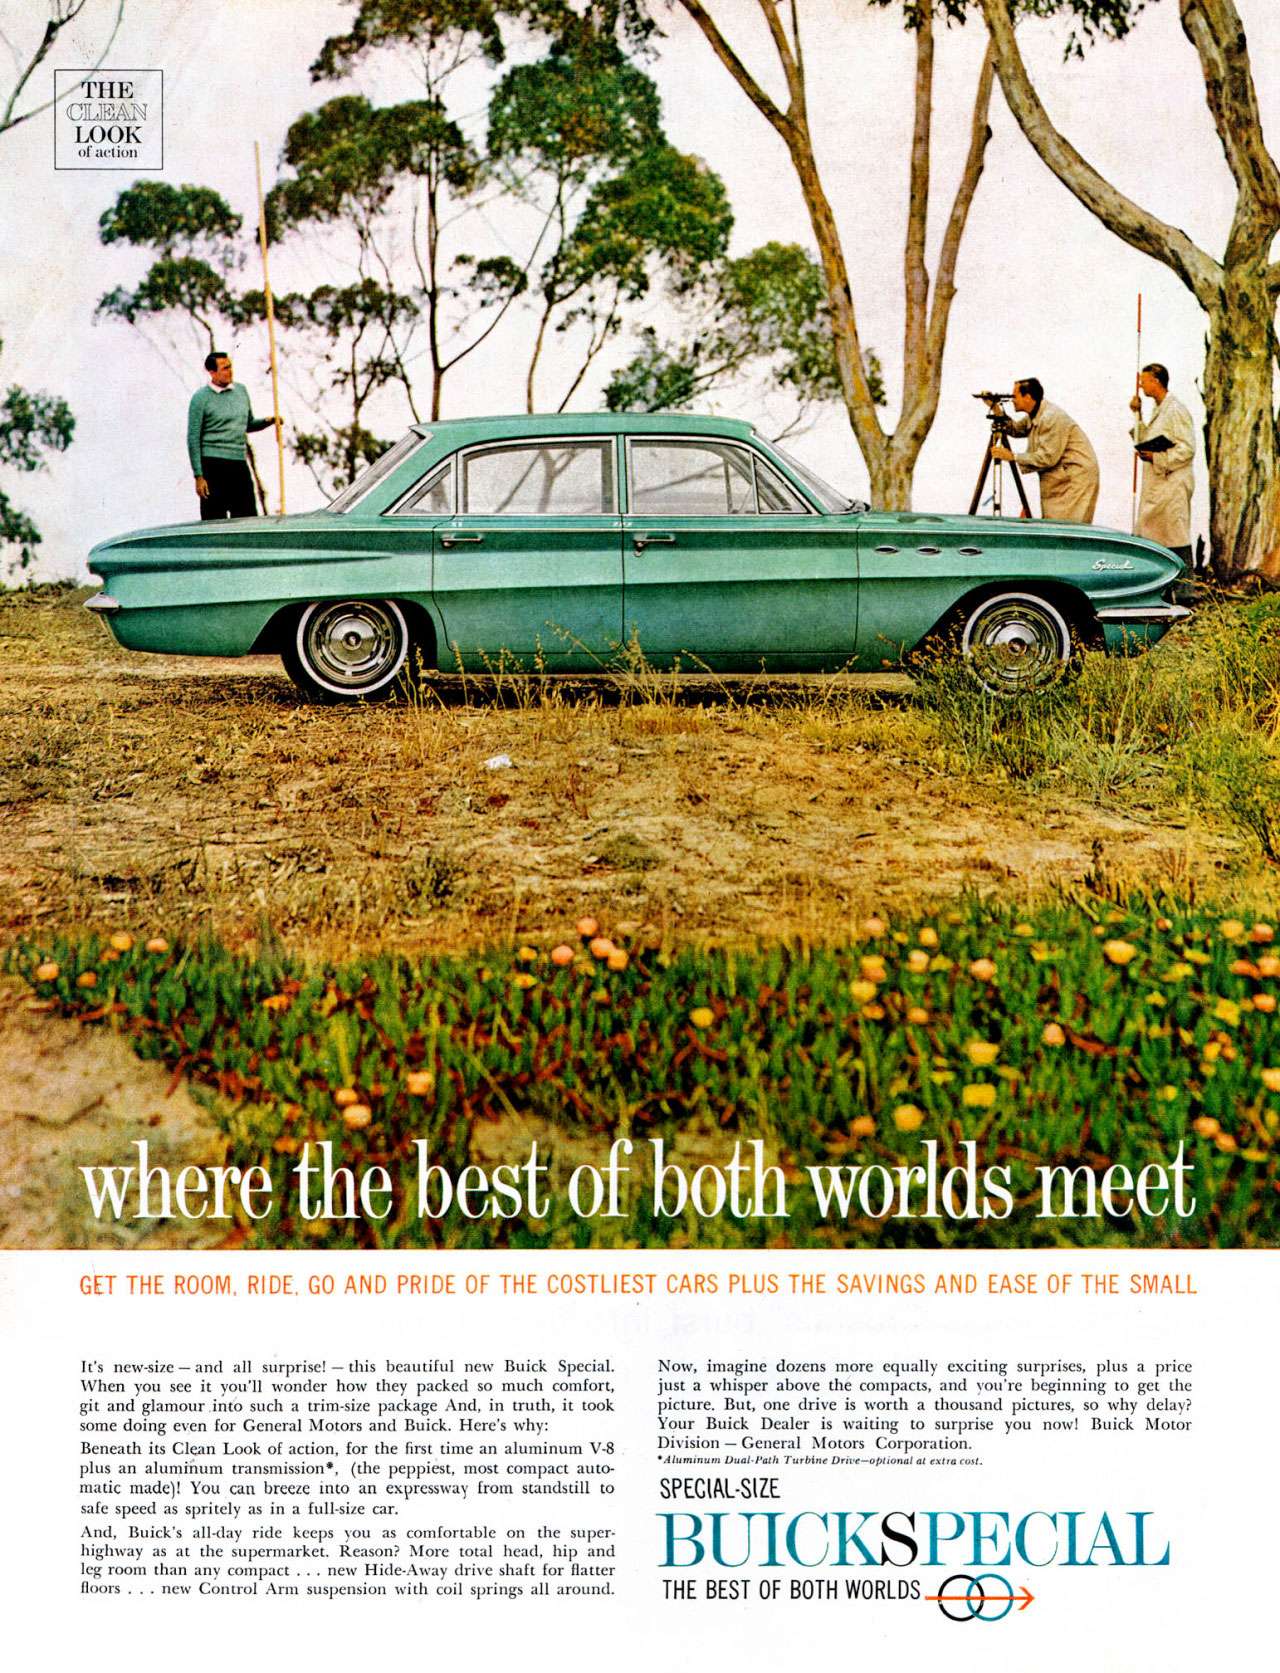 Buick Special. Where the best of both worlds meet.